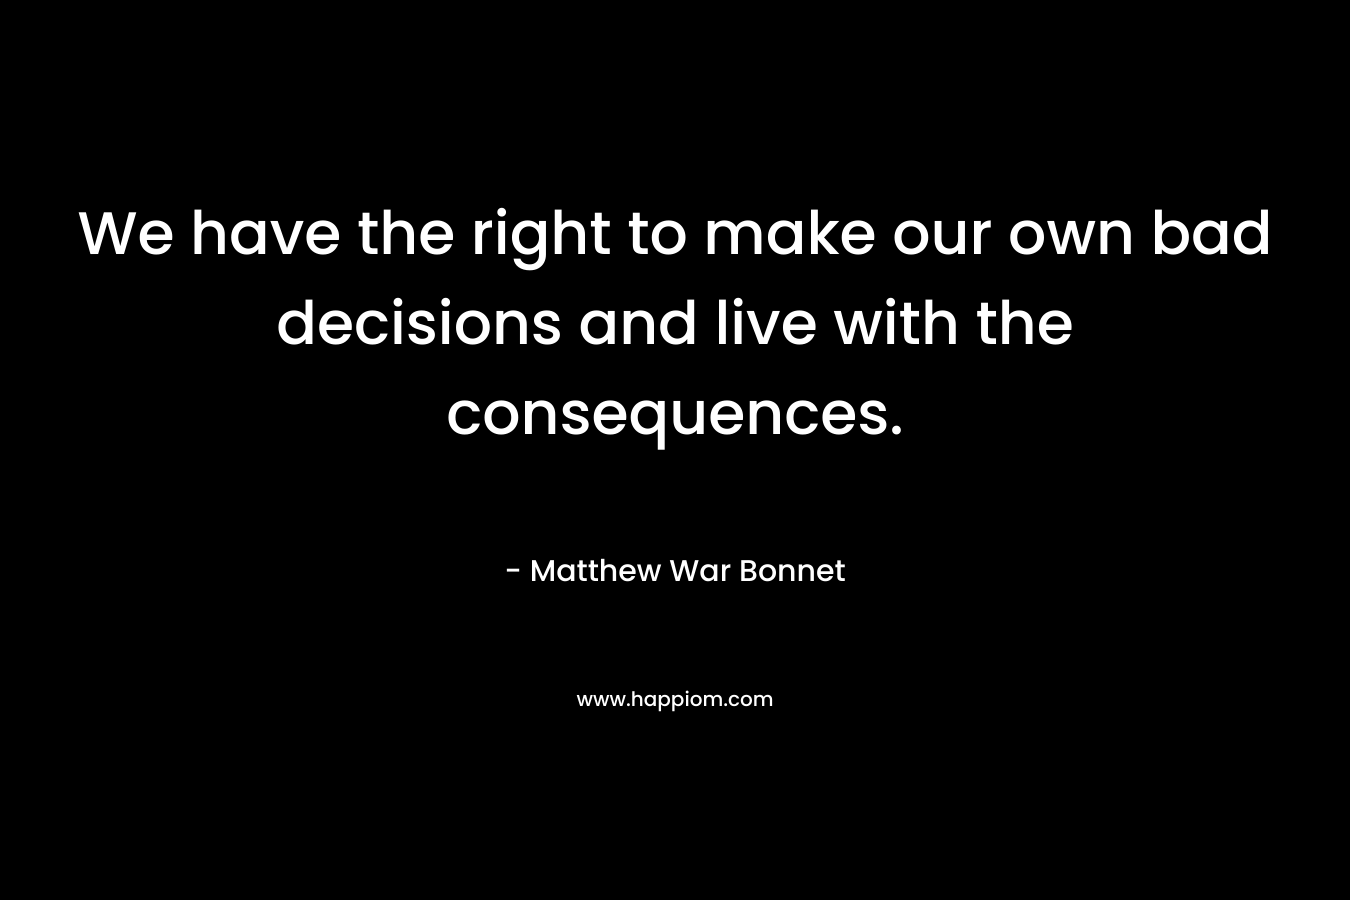 We have the right to make our own bad decisions and live with the consequences. – Matthew War Bonnet